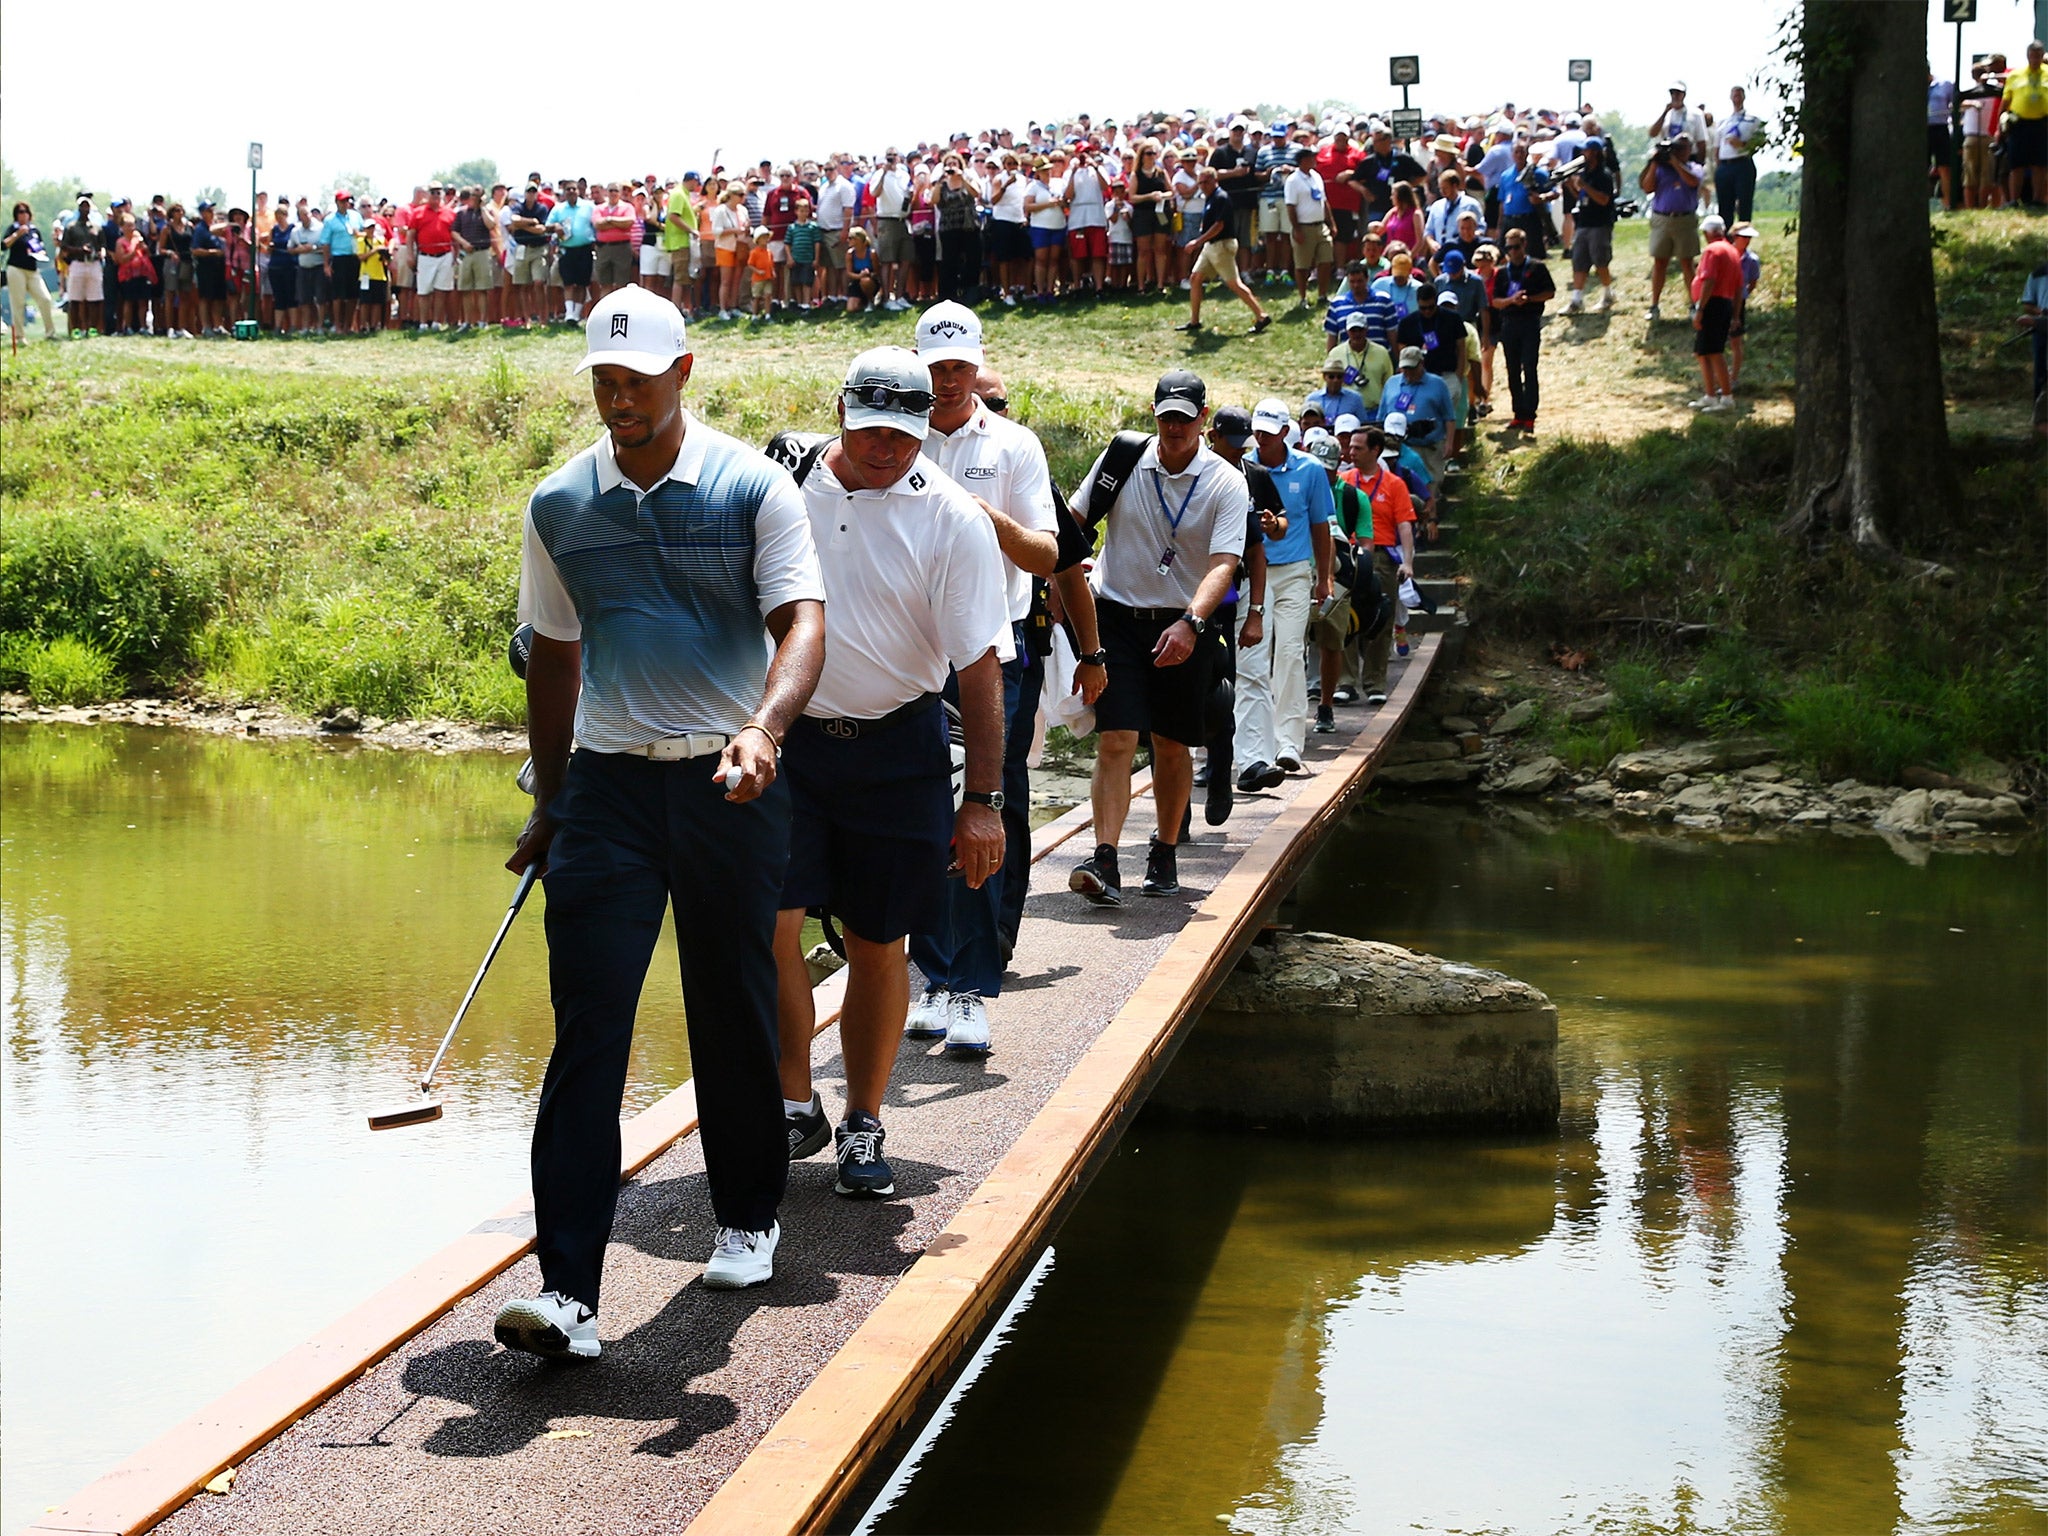 Tiger Woods crosses a bridge during a practice round as he sought to prove he had recovered from injury ahead the US PGA Championship